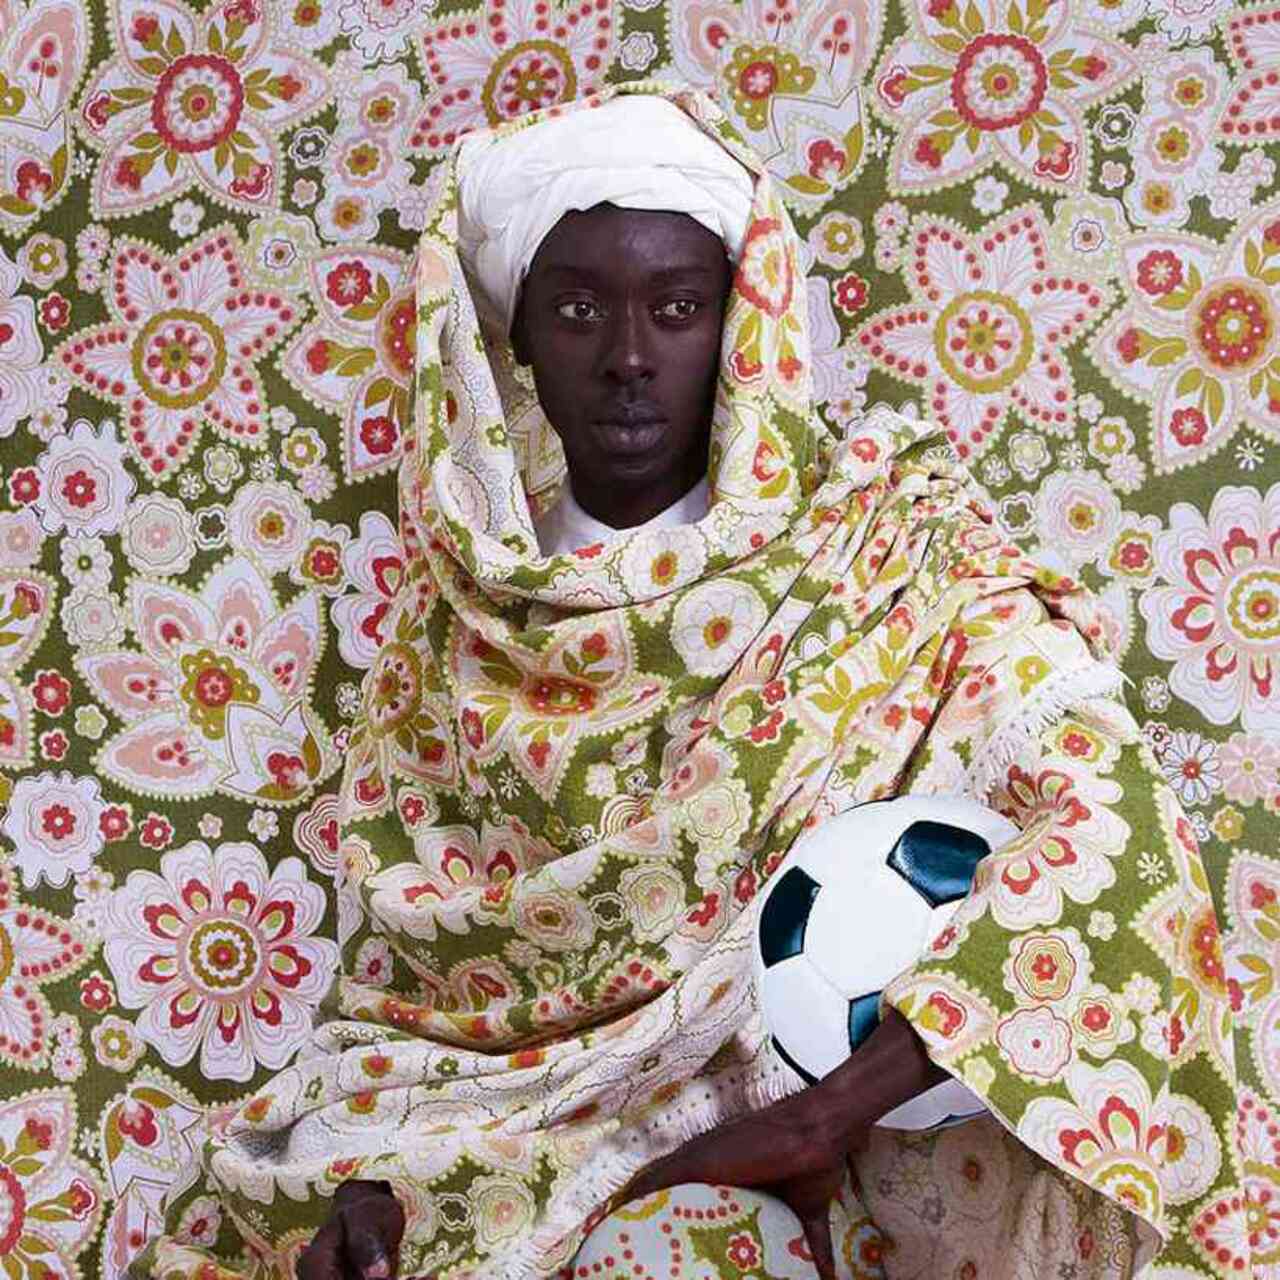 Omar Victor Dip presented his remixed portraits of Africa’s past at Design Indaba in Cape Town http://t.co/fvpWRHPC4D